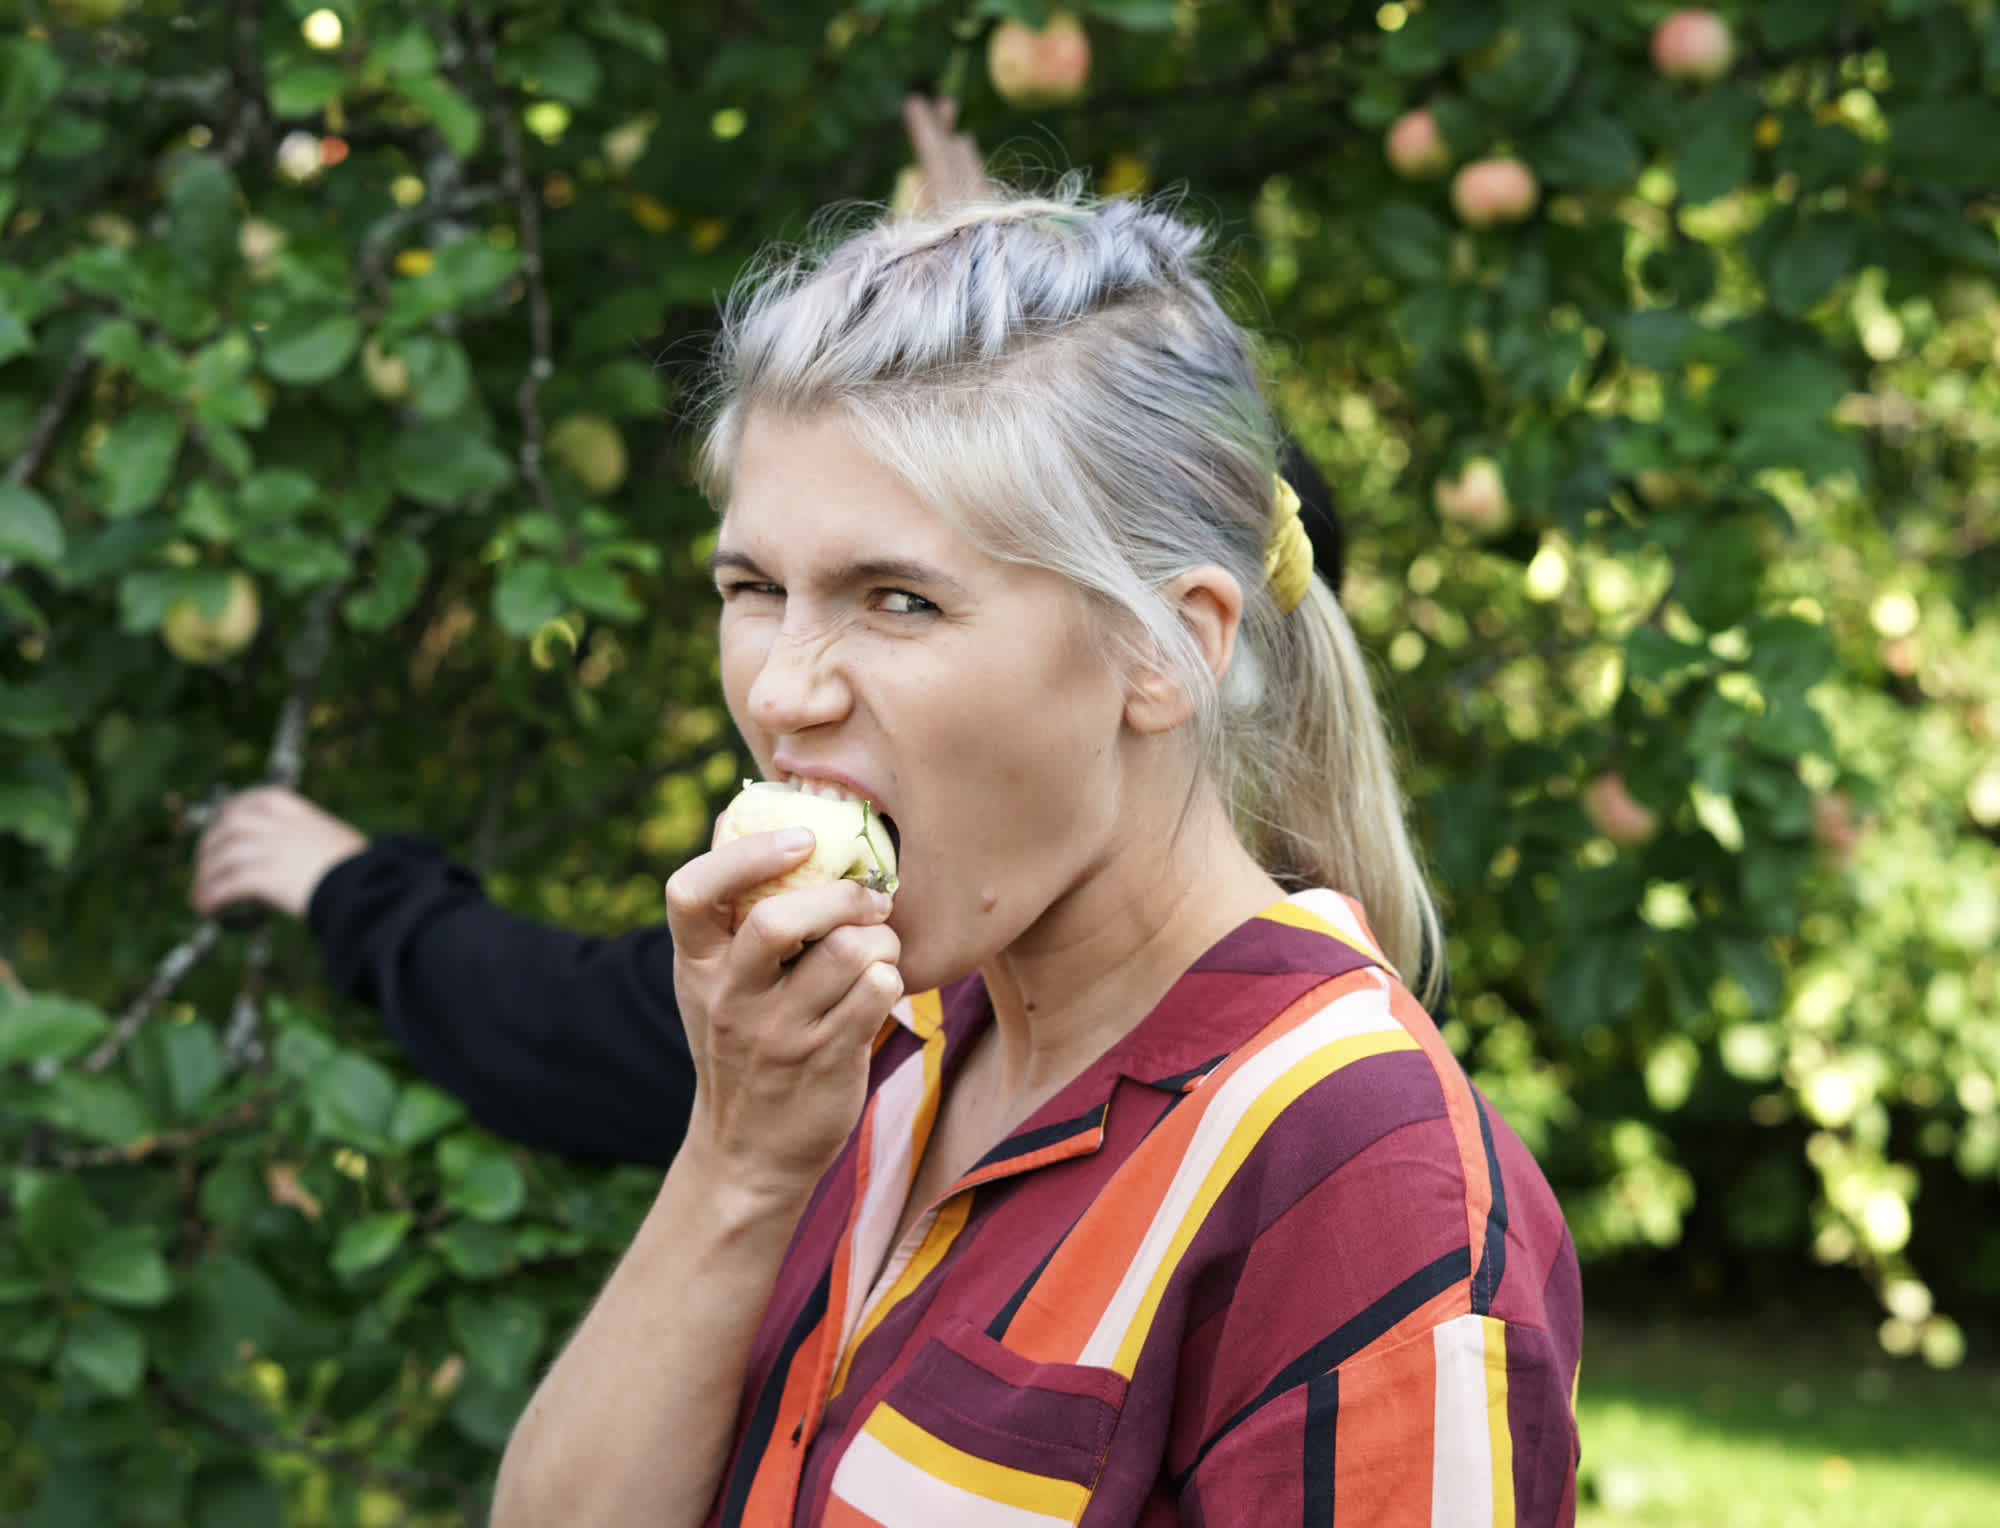 A young woman biting into an apple.